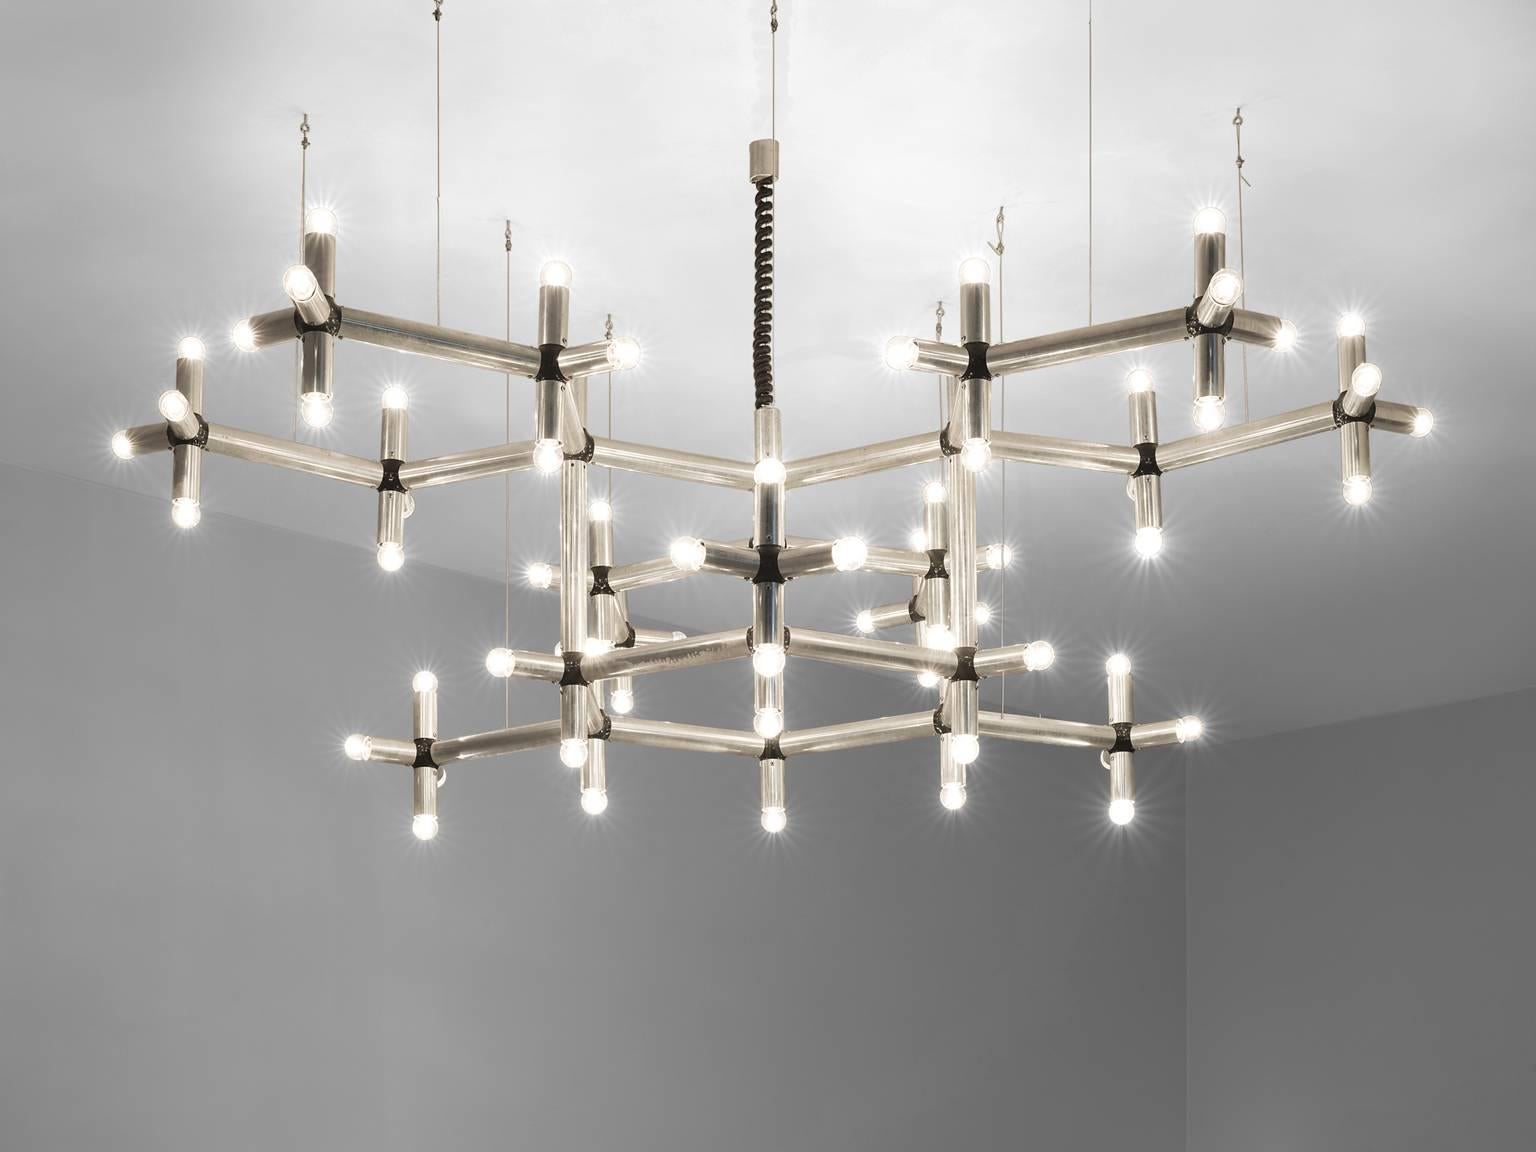 Robert Haussmann, chandelier, polished steel with 70 bulbs, Europe, 1970s.

This chandelier is part of the midcentury design collection. The chandelier is executed in chromed steel and features a frame that spreads out as if it were a natural